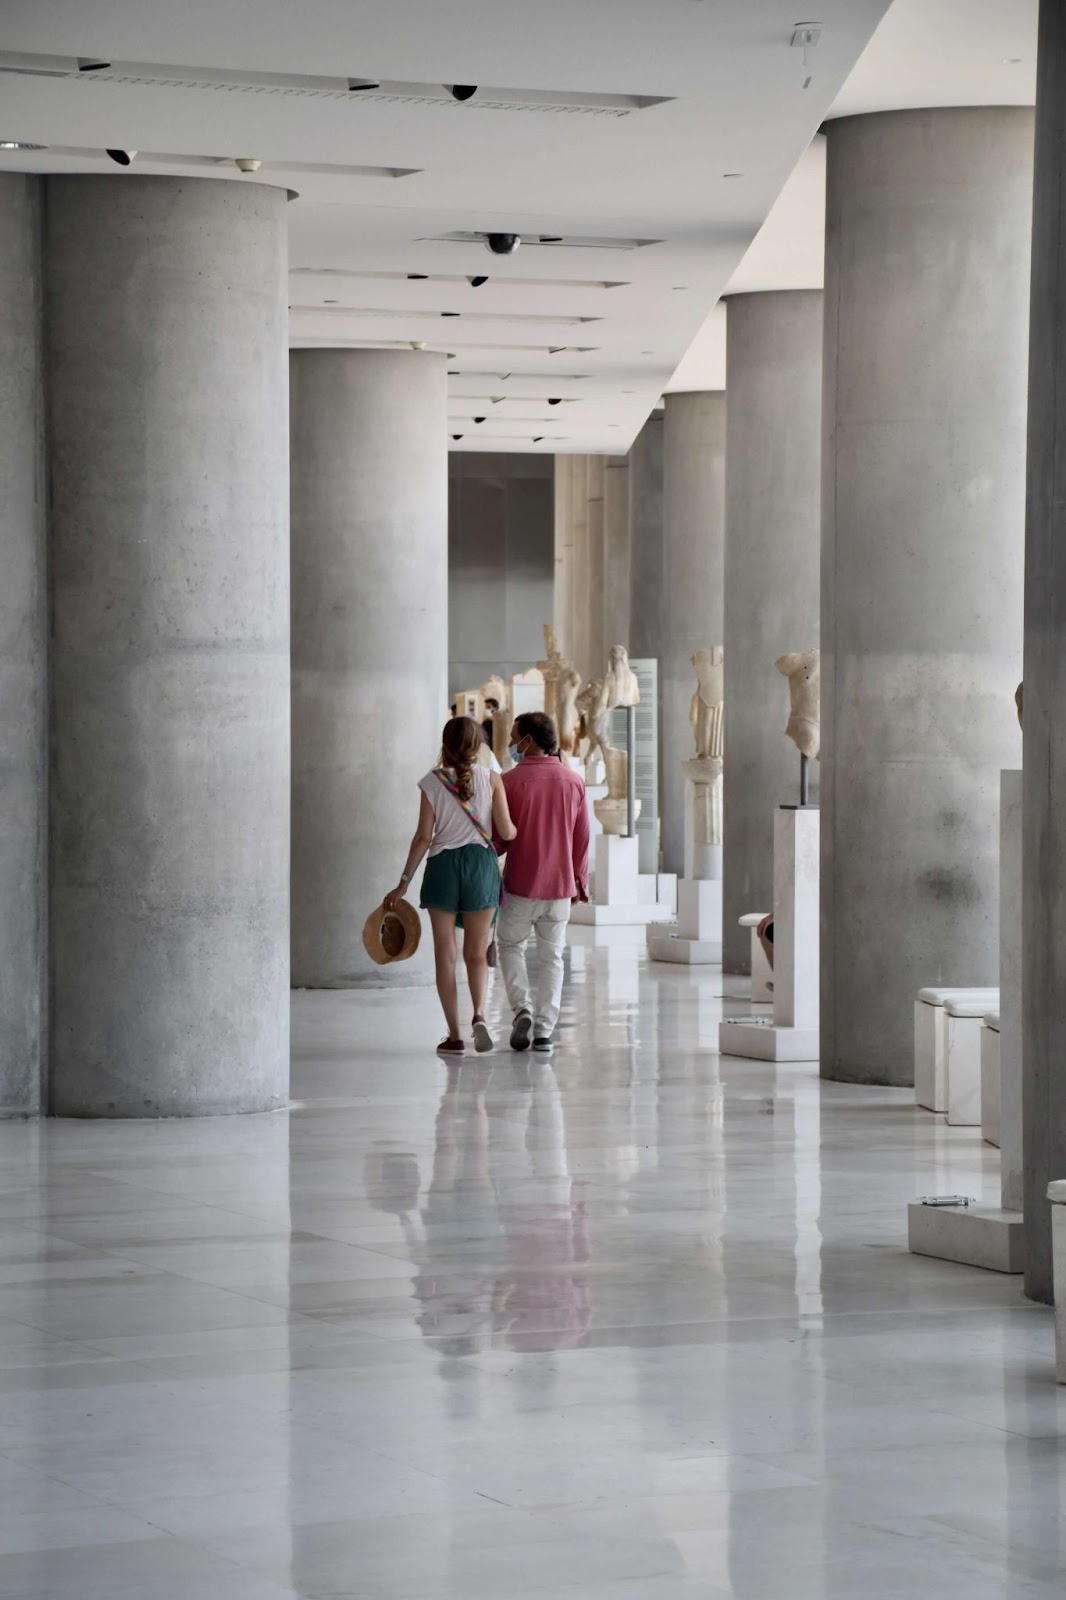 1 day in Athens, Acropolis Museum, exhibits from the slopes of the Acropolis